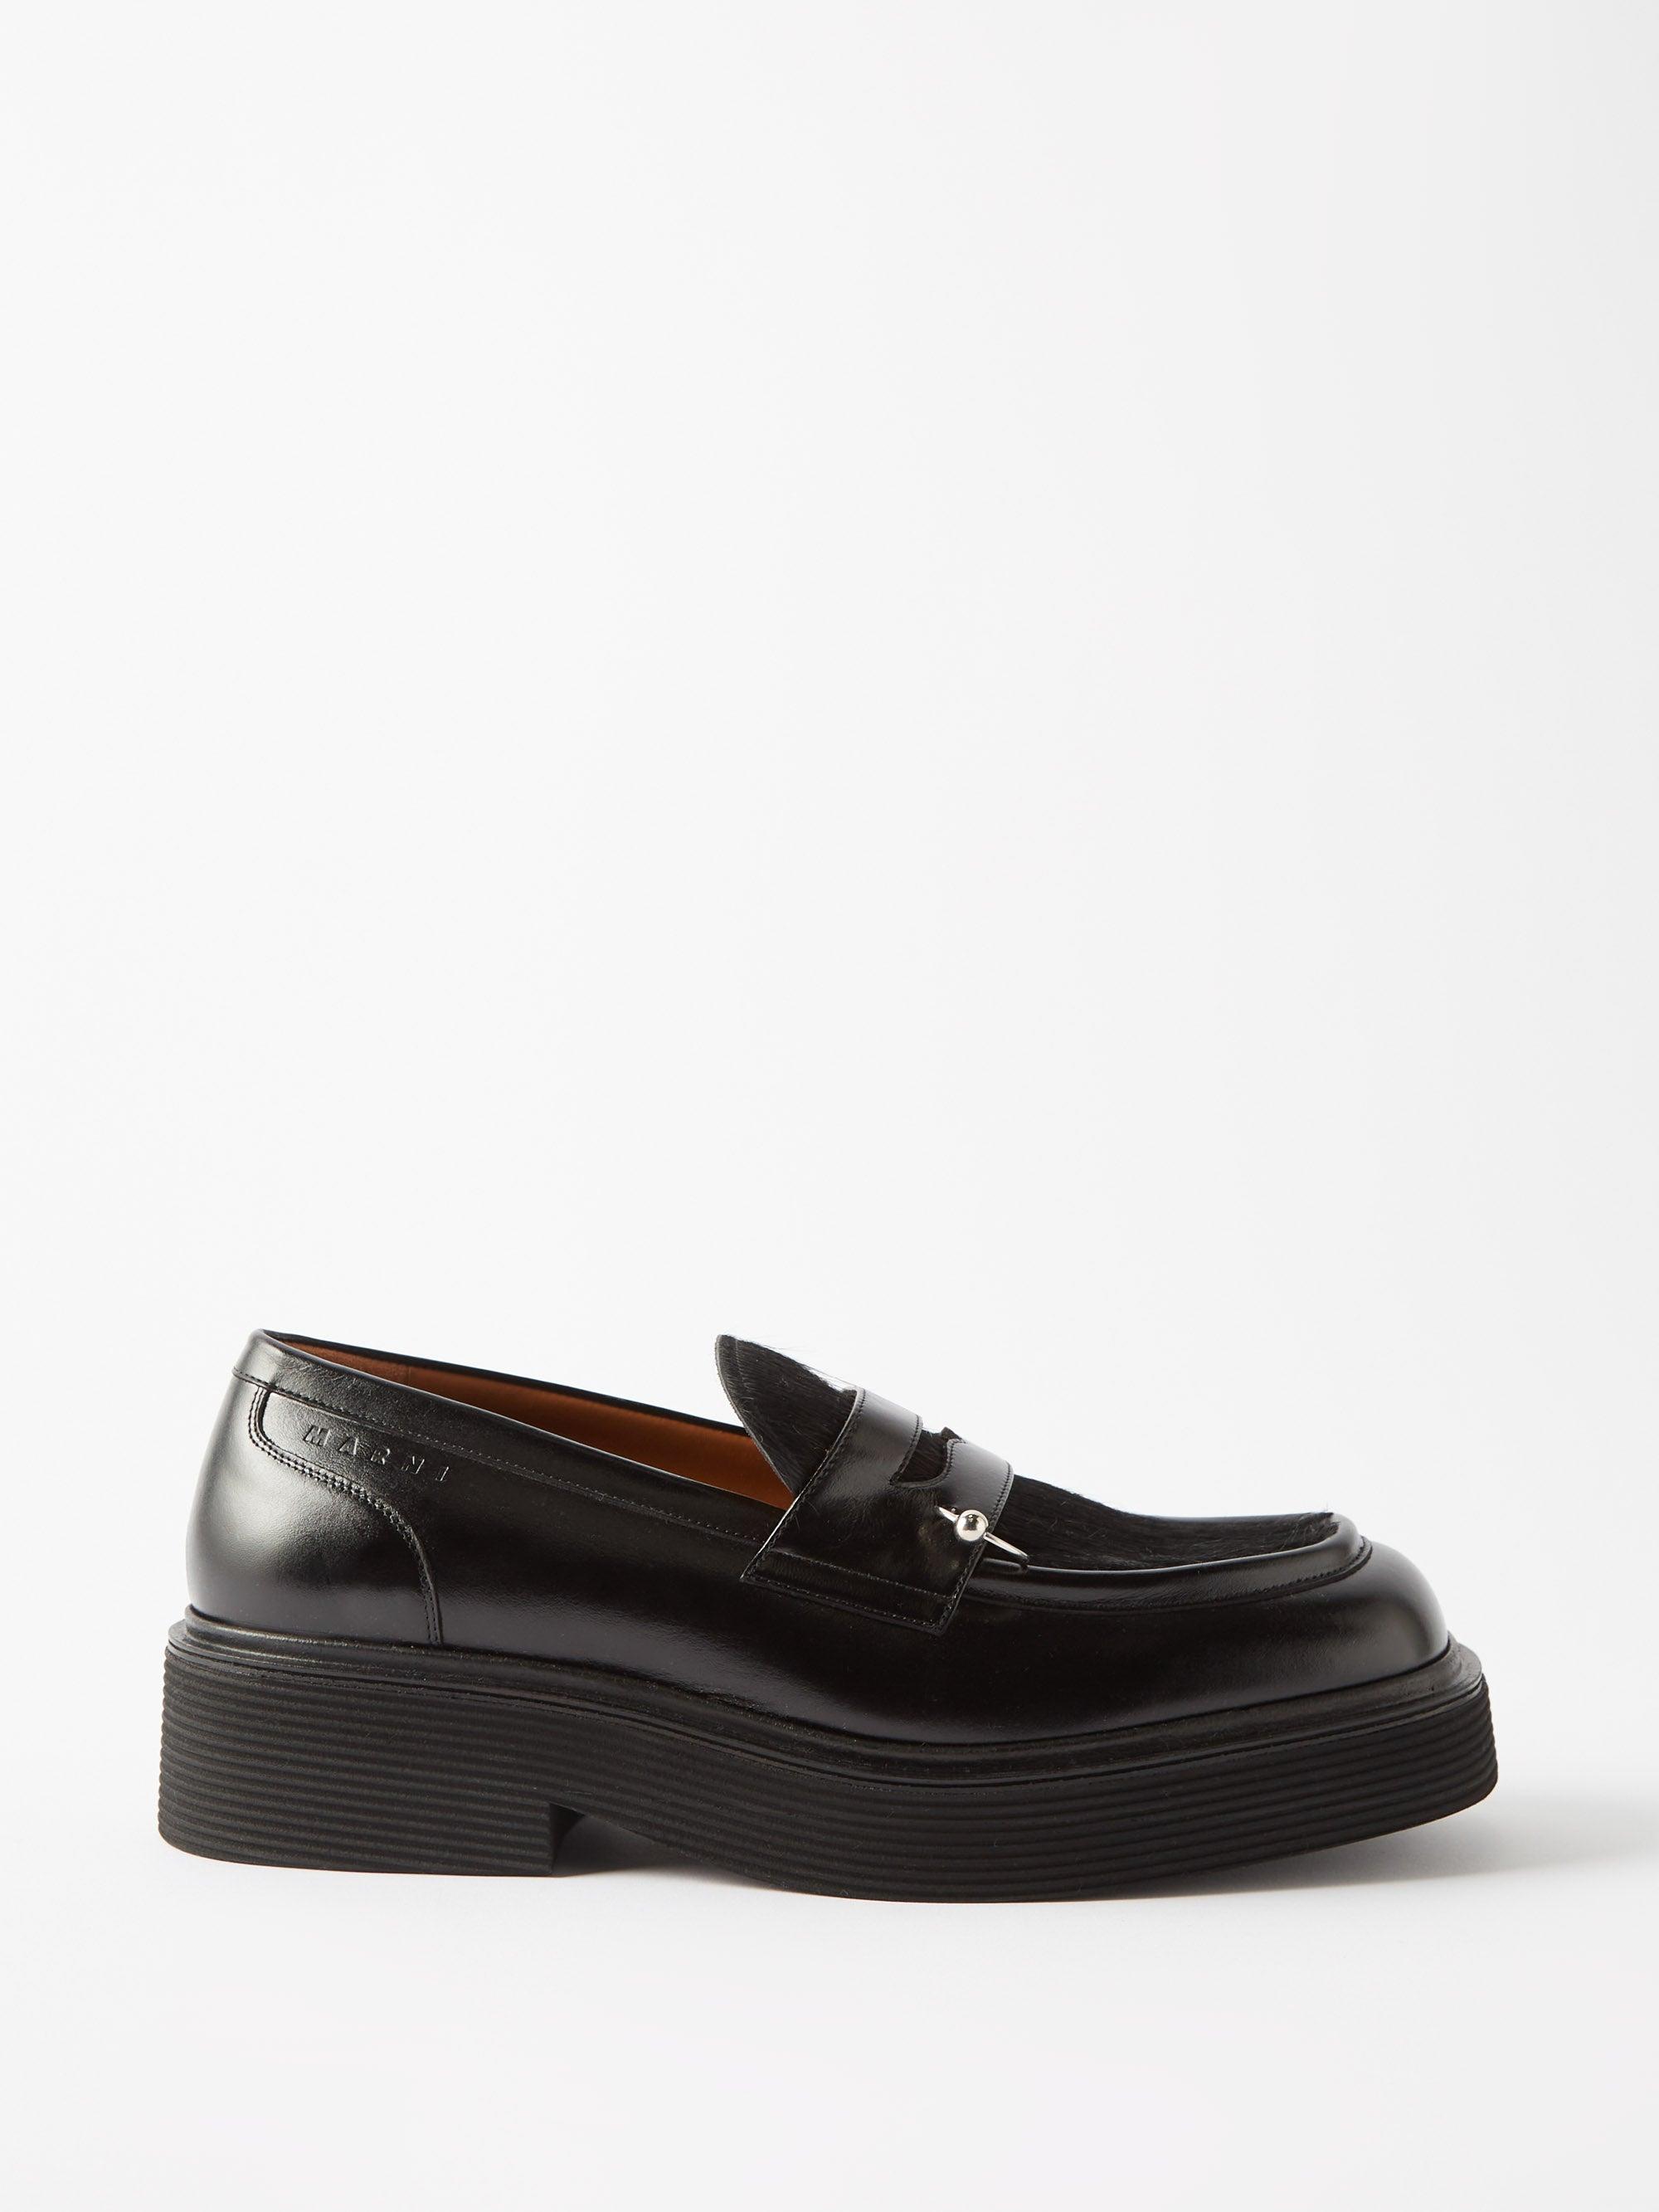 Marni Moccasin Pierced Leather Penny Loafers in Black for Men | Lyst